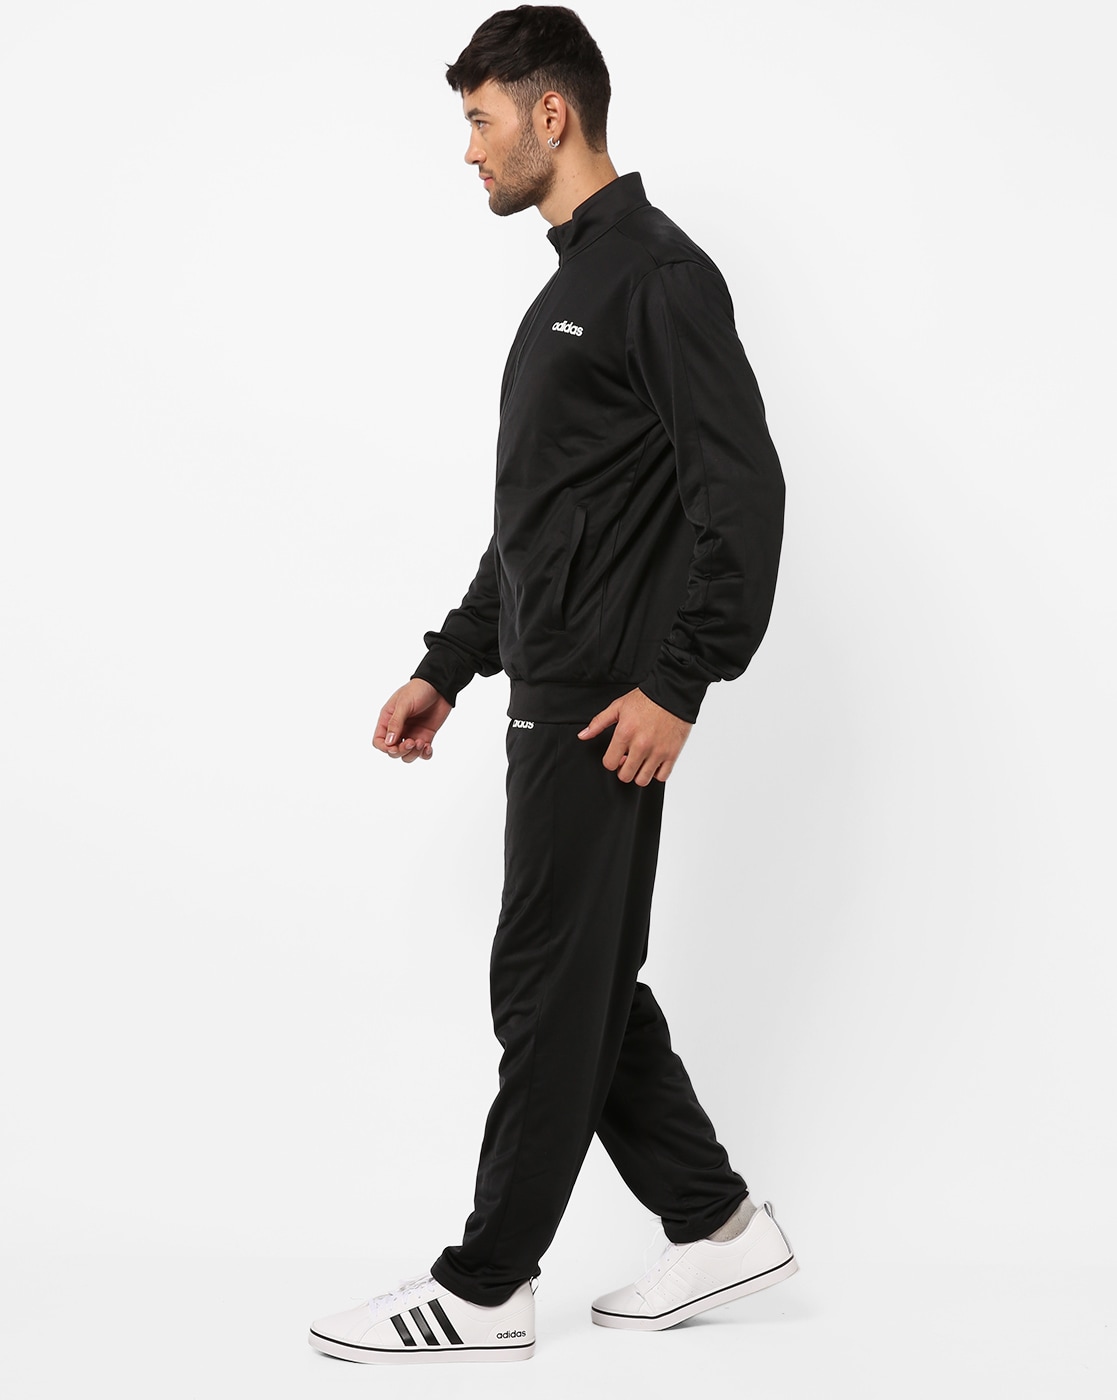 Clothing - 3-Stripes Woven Track Suit - Black | adidas South Africa